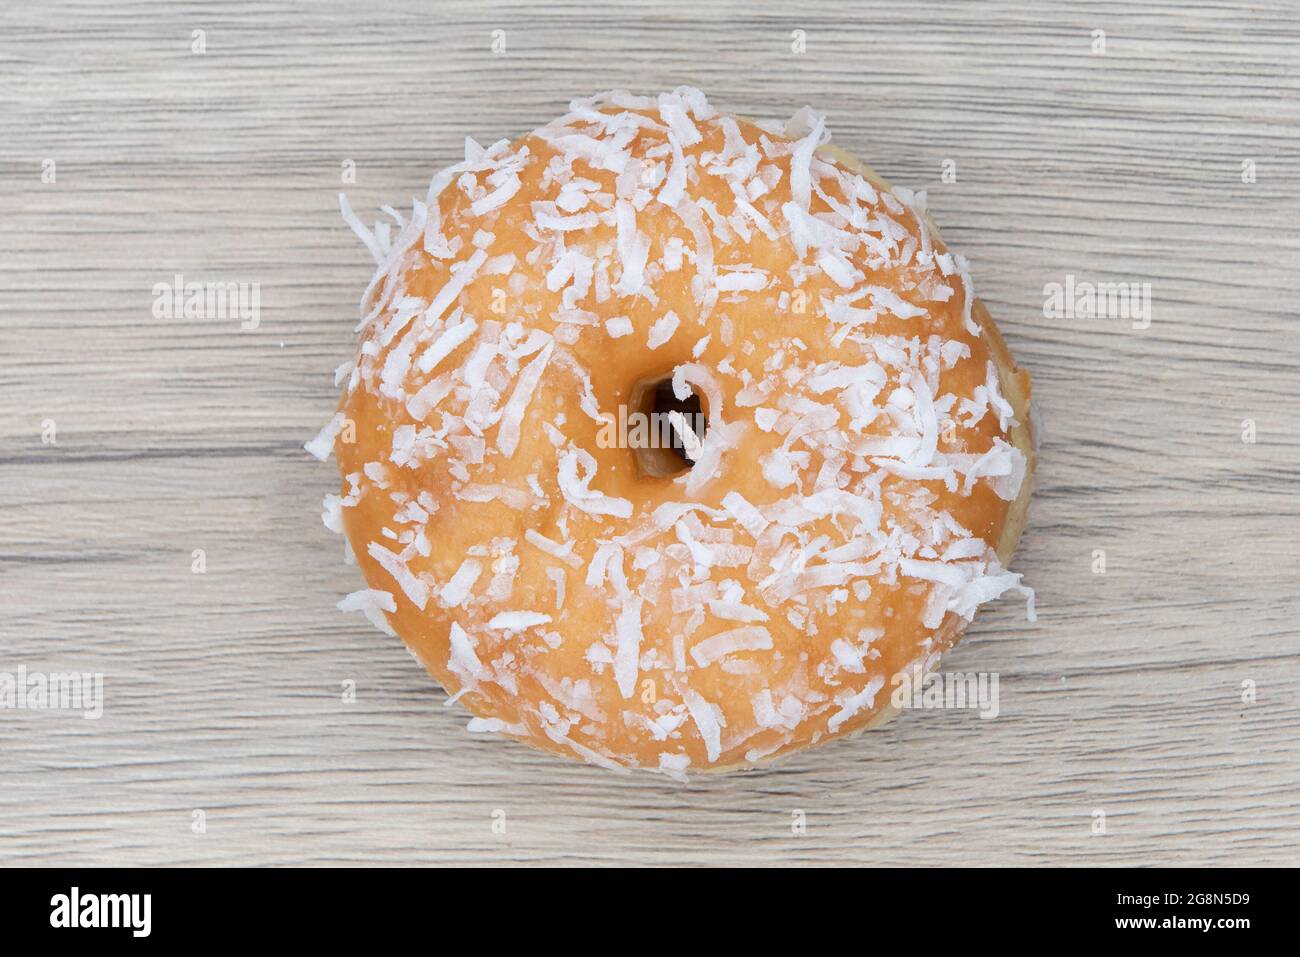 Overhead view of cocnut raised  donut is textured with glazed coating for a sweet treat delight. Stock Photo